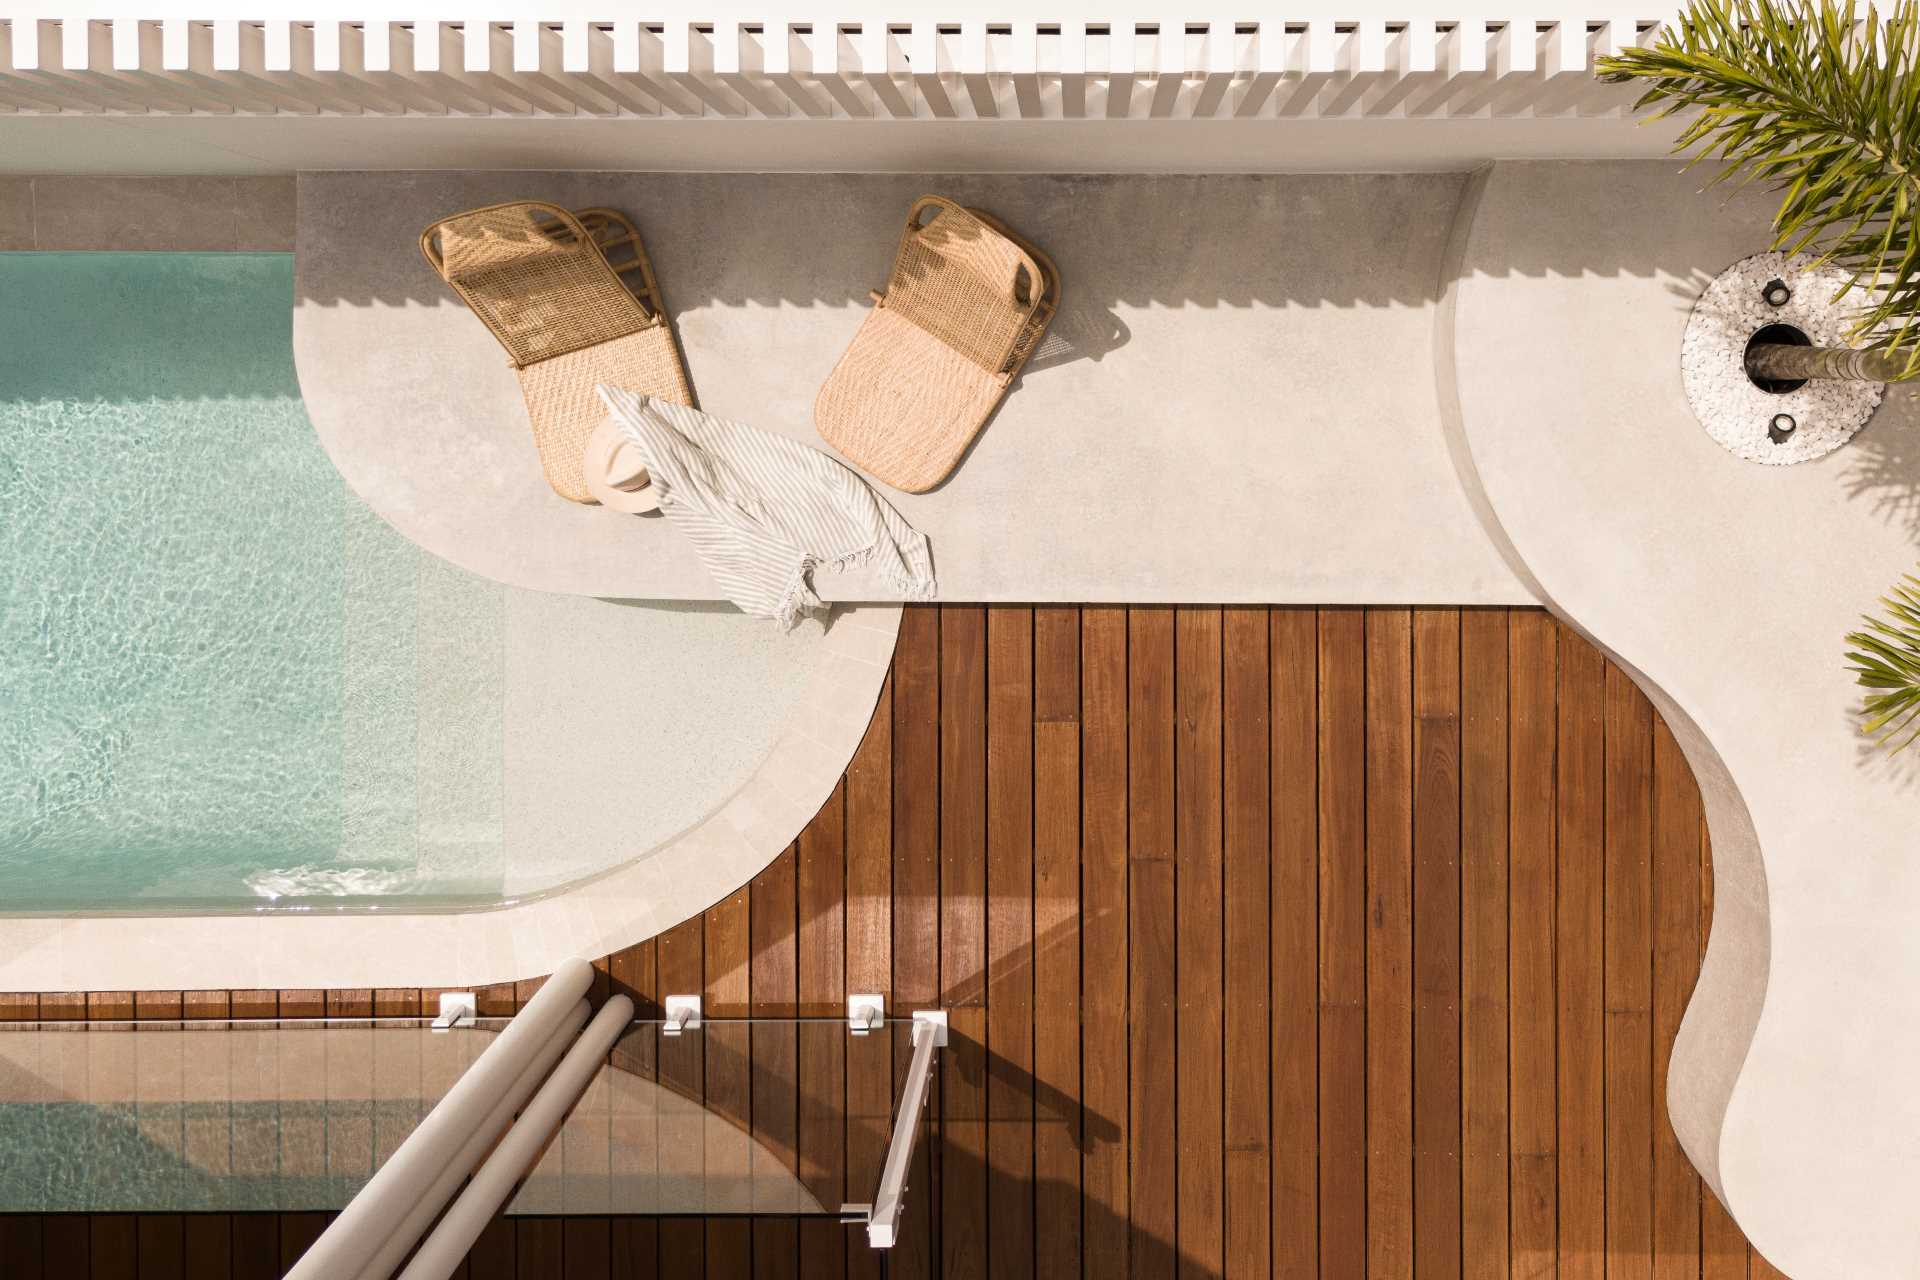 A swimming pool with a wood deck and a raised platform for lounging in the sun.